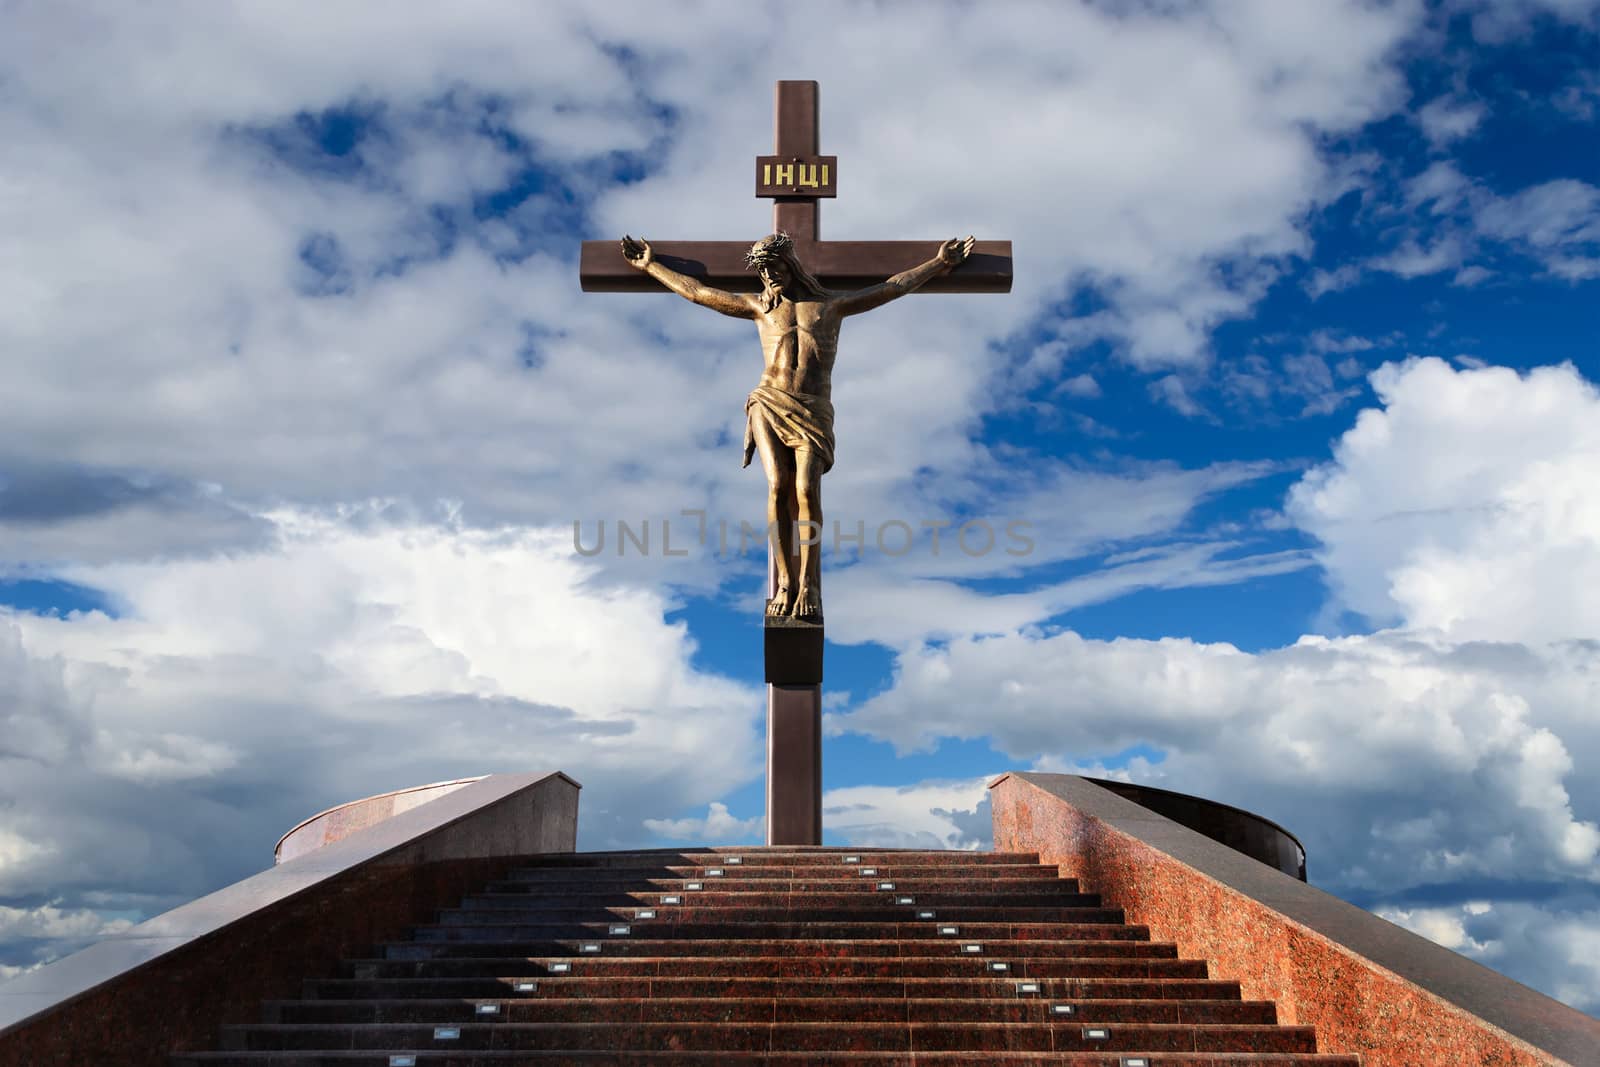 Statue of the crucifixion by s96serg